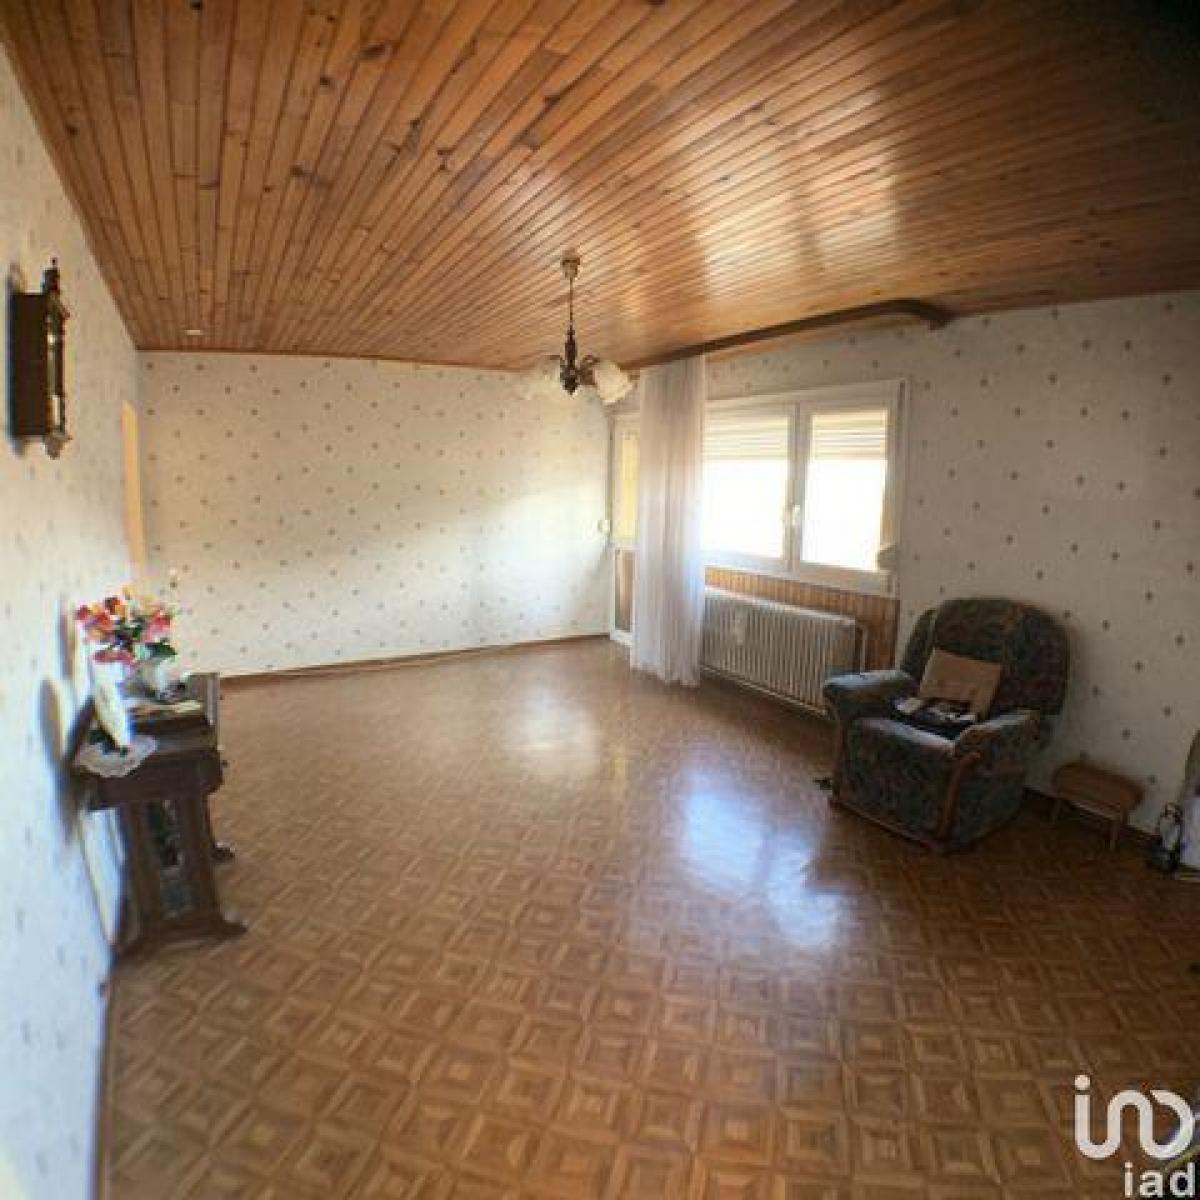 Picture of Condo For Sale in Rombas, Lorraine, France